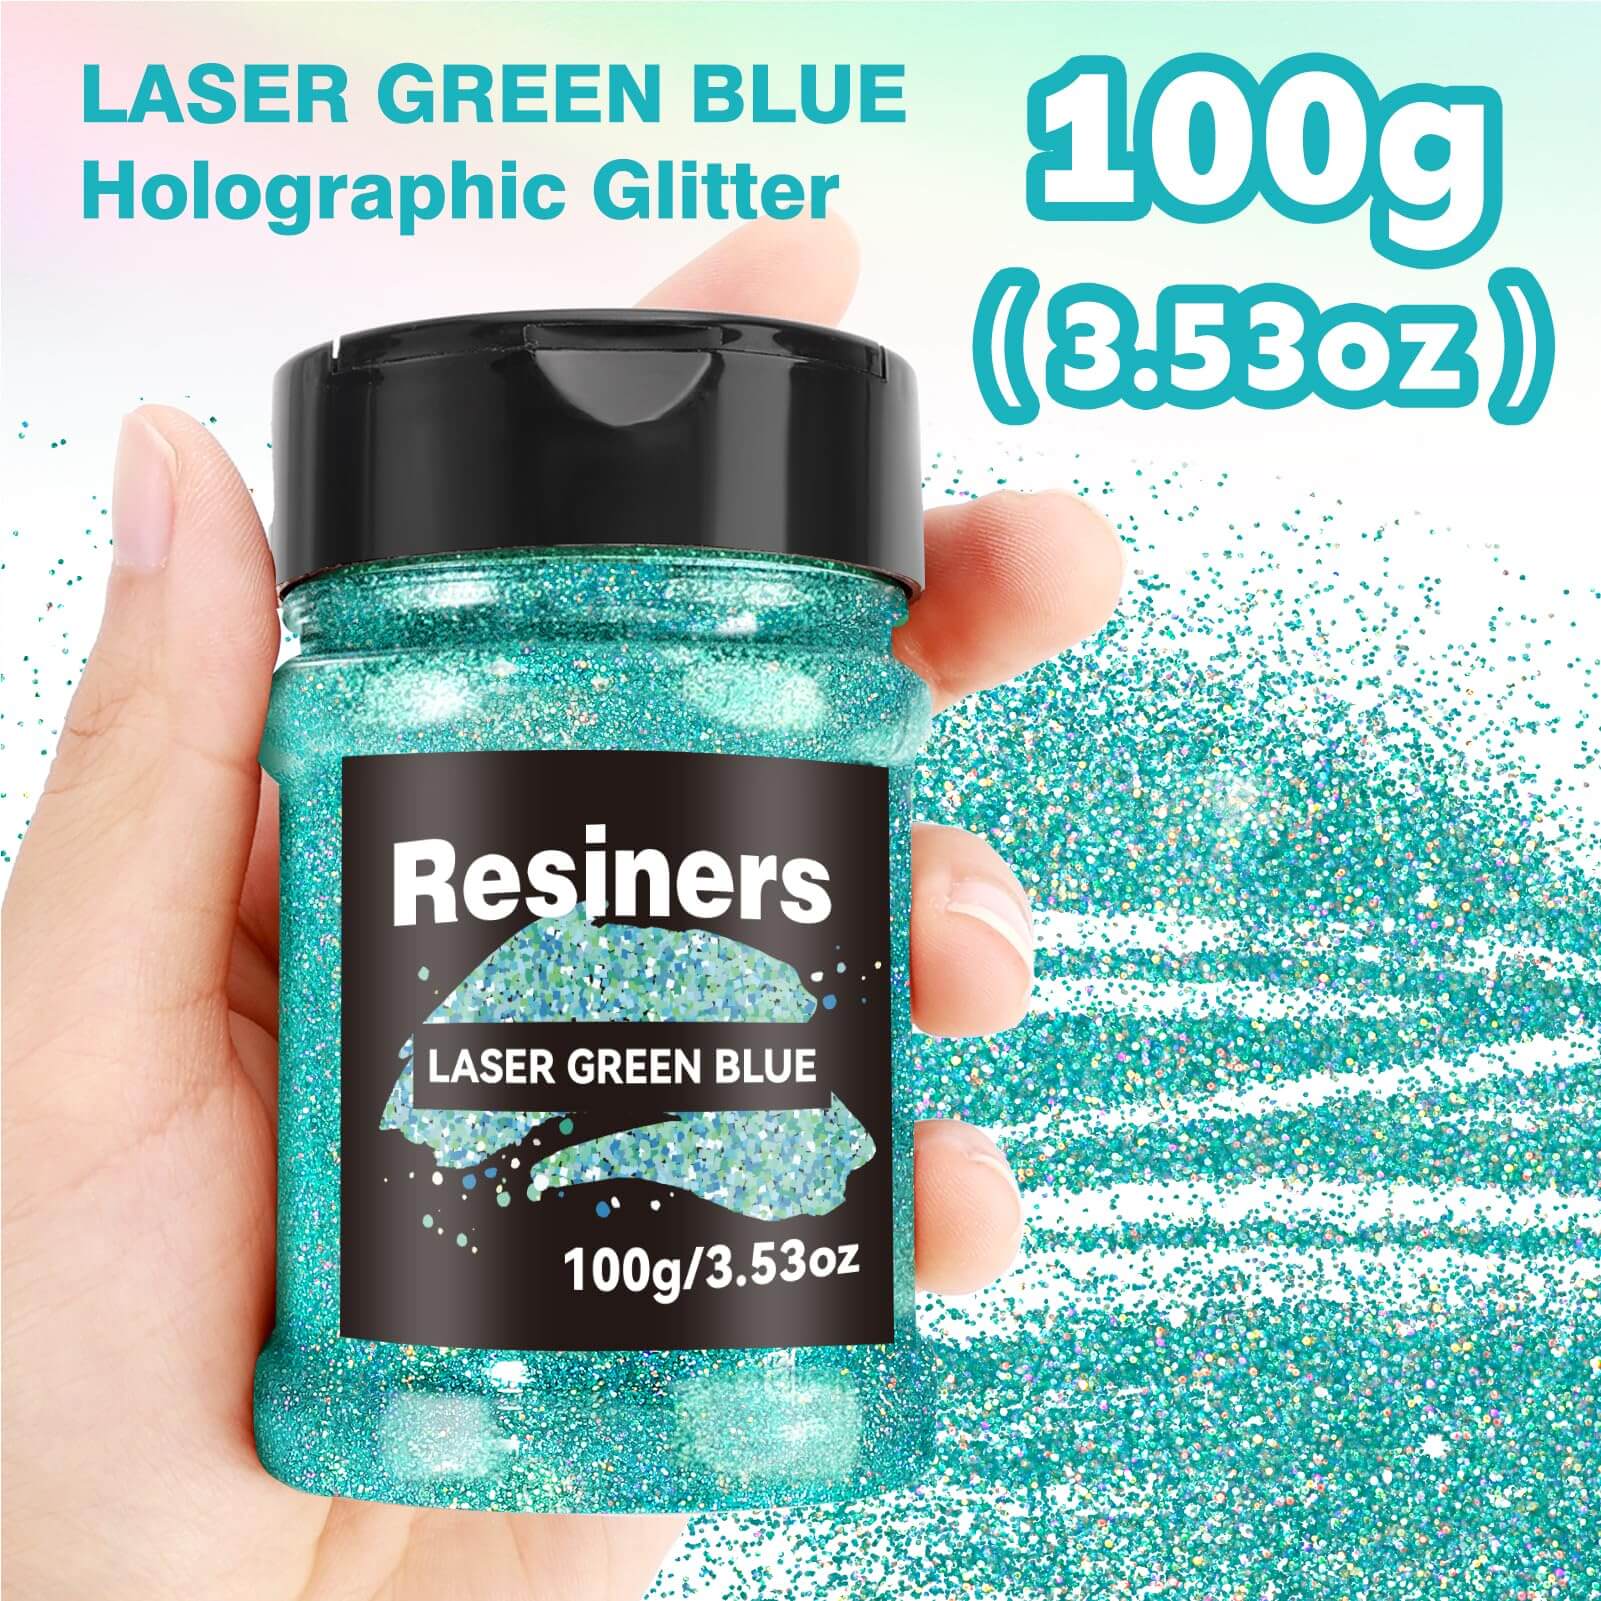 Resiners® Holographic Ultra Fine Glitter Powder